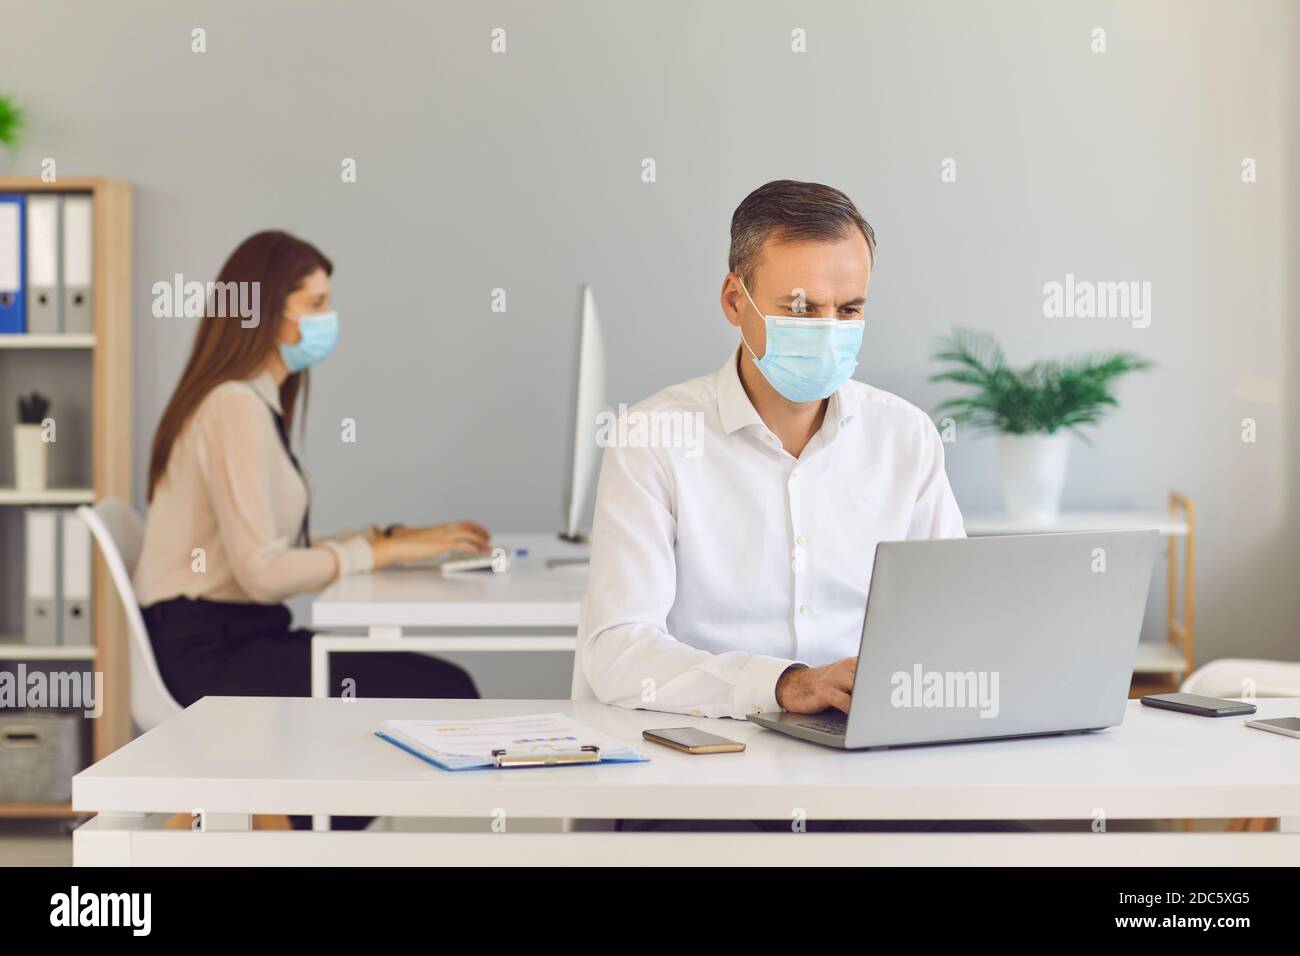 Conscious employees wear masks to protect their customers and prevent the spread of COVID-19. Stock Photo